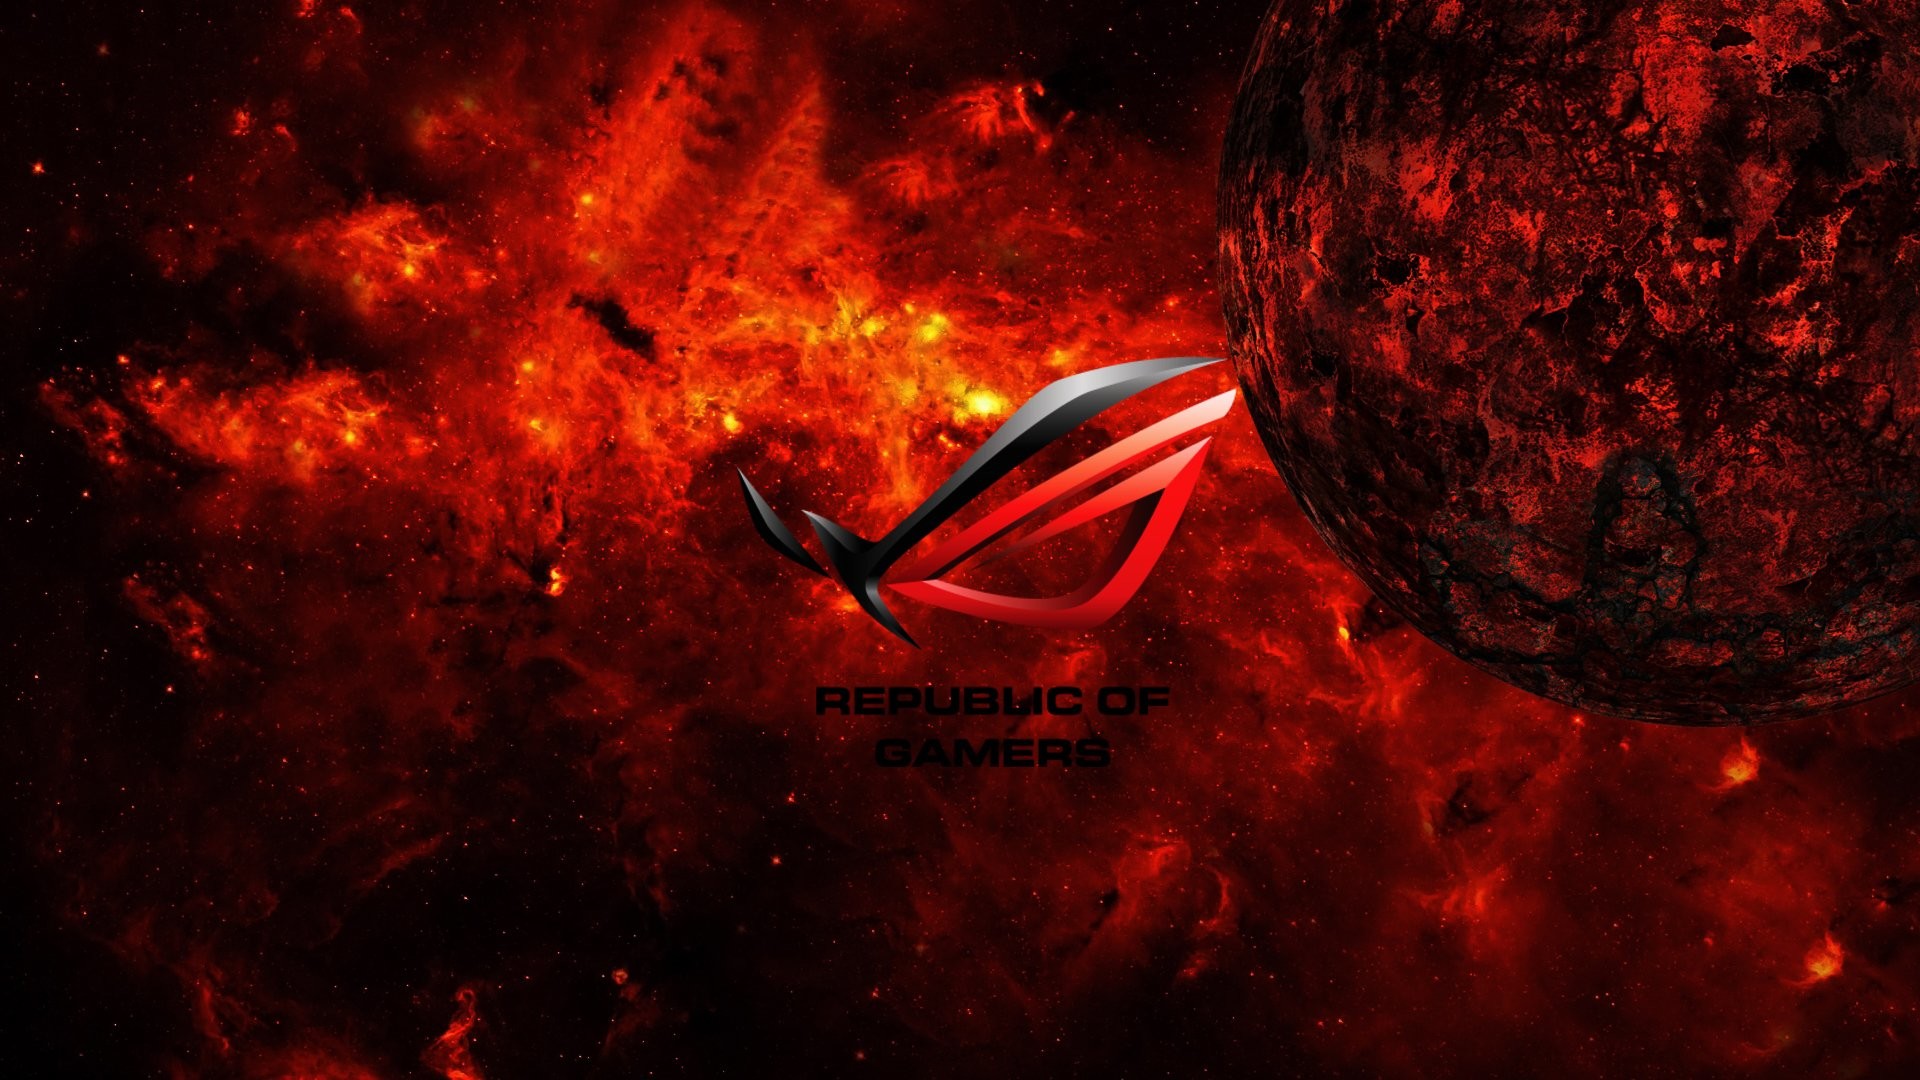 1920x1080 Technology - Asus Computer Red Republic of Gamers Wallpaper